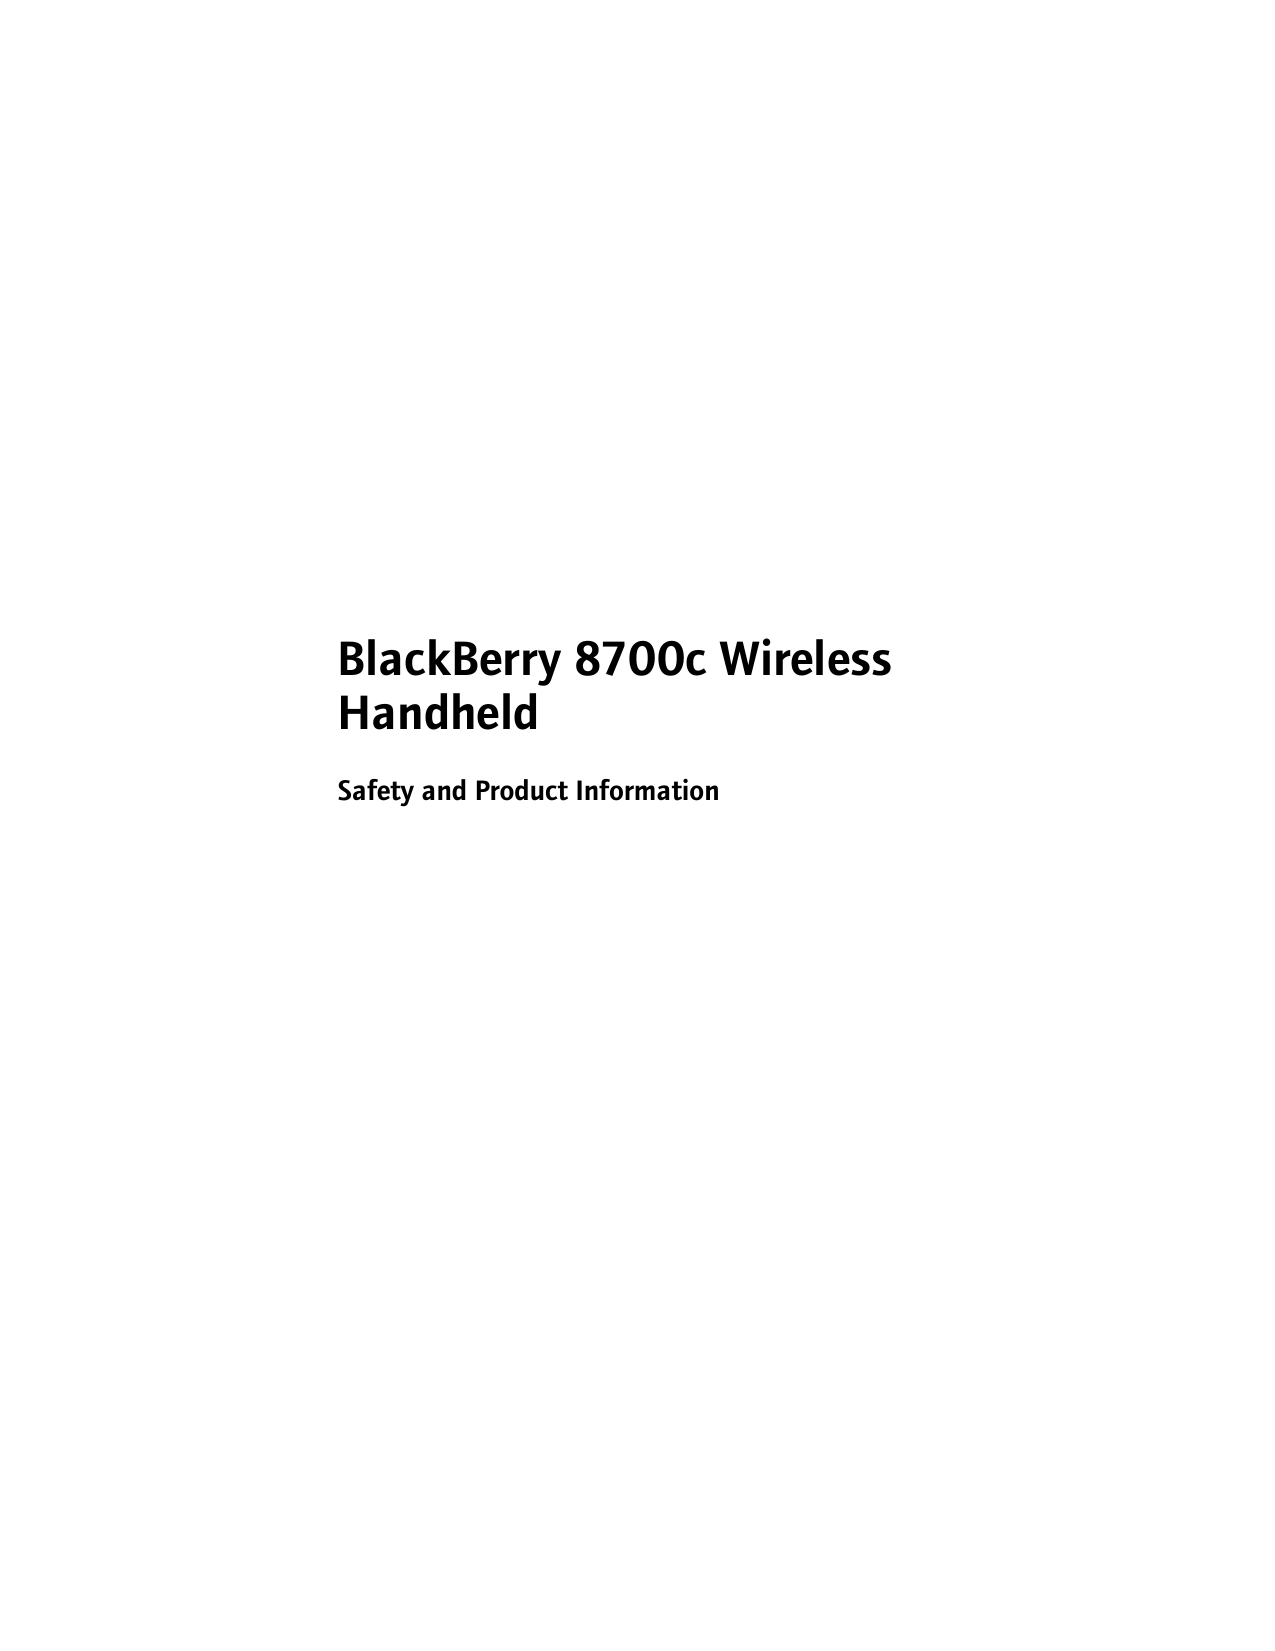 BlackBerry 8700c Wireless HandheldSafety and Product Information 